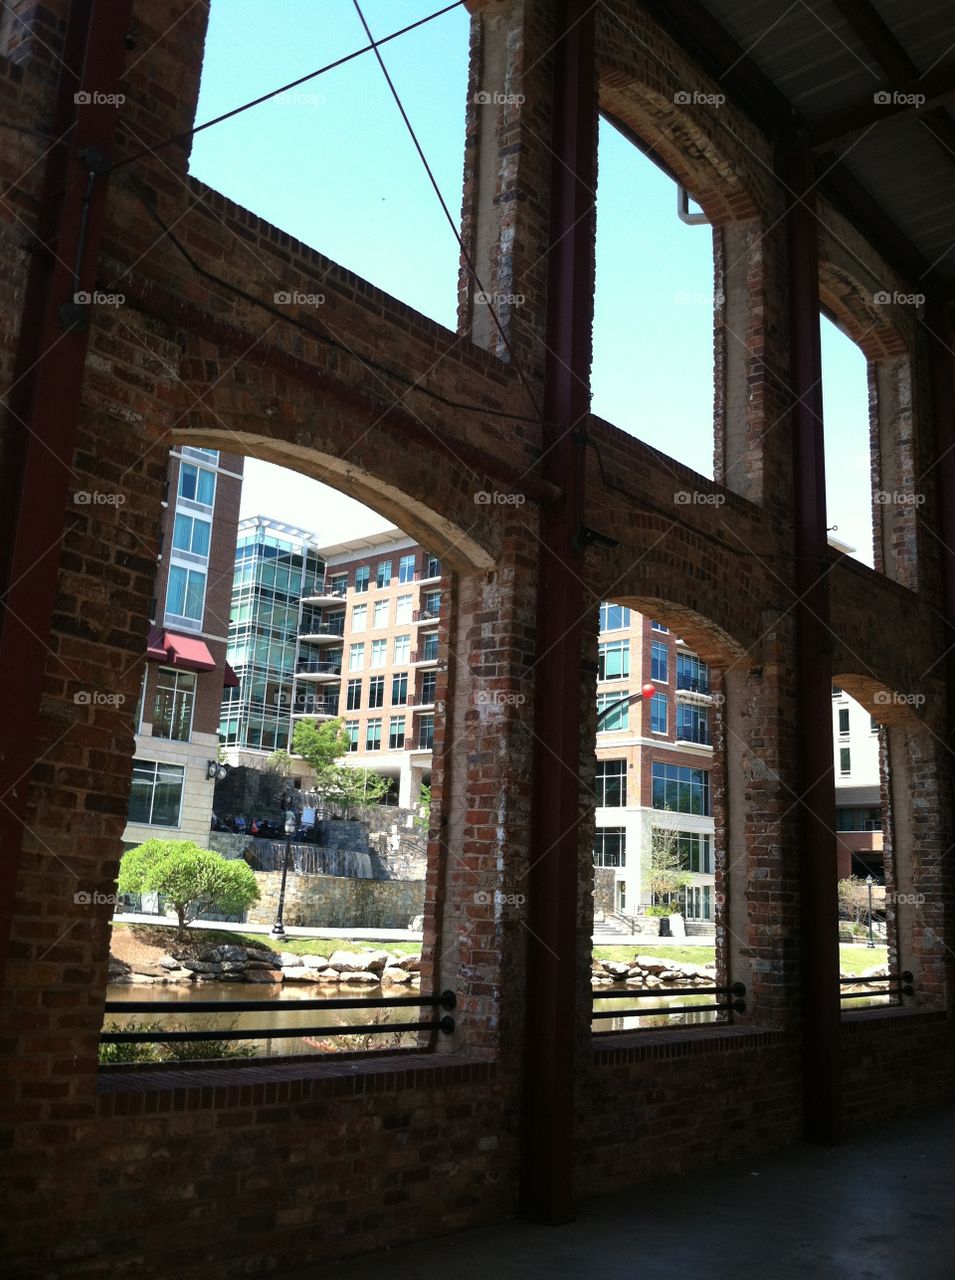 Modern buildings along river walk seen through arched windows of historic brick building.